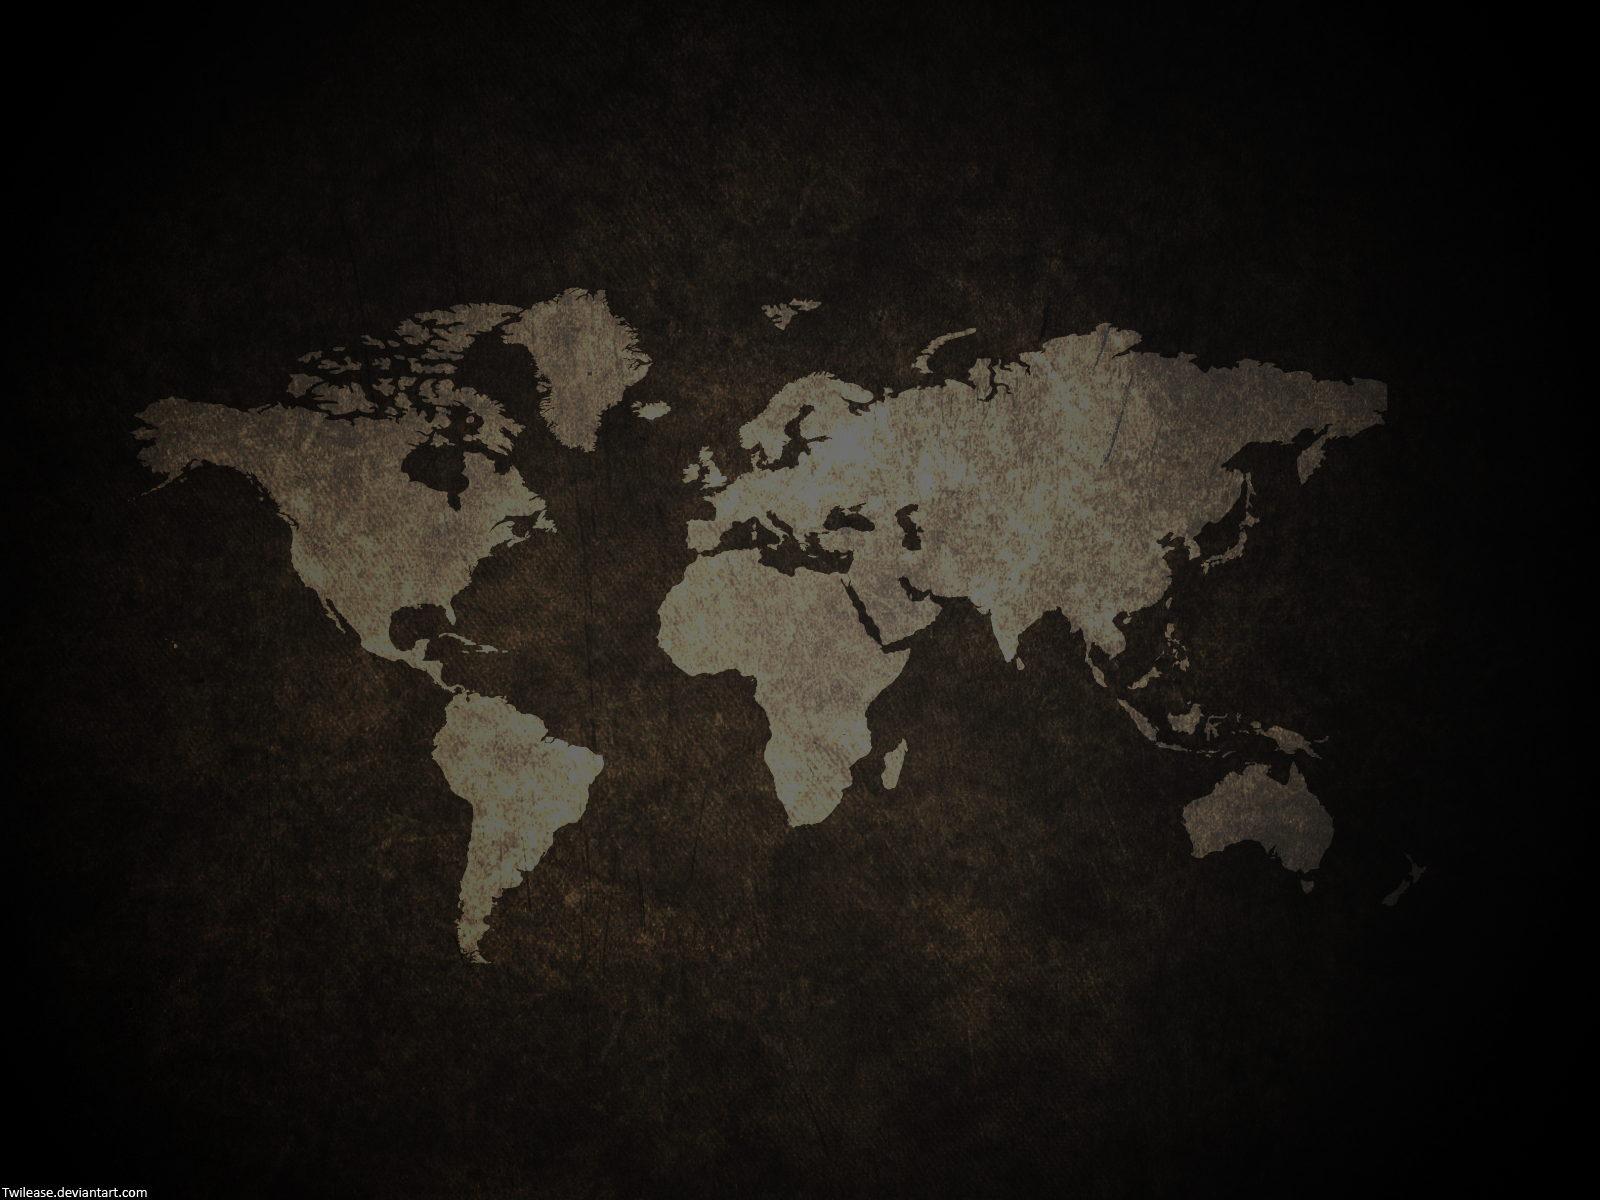 Wallpaper Set 24 » Global_Map. 21 Sep 2010 Leave a Comment. by Efreak15